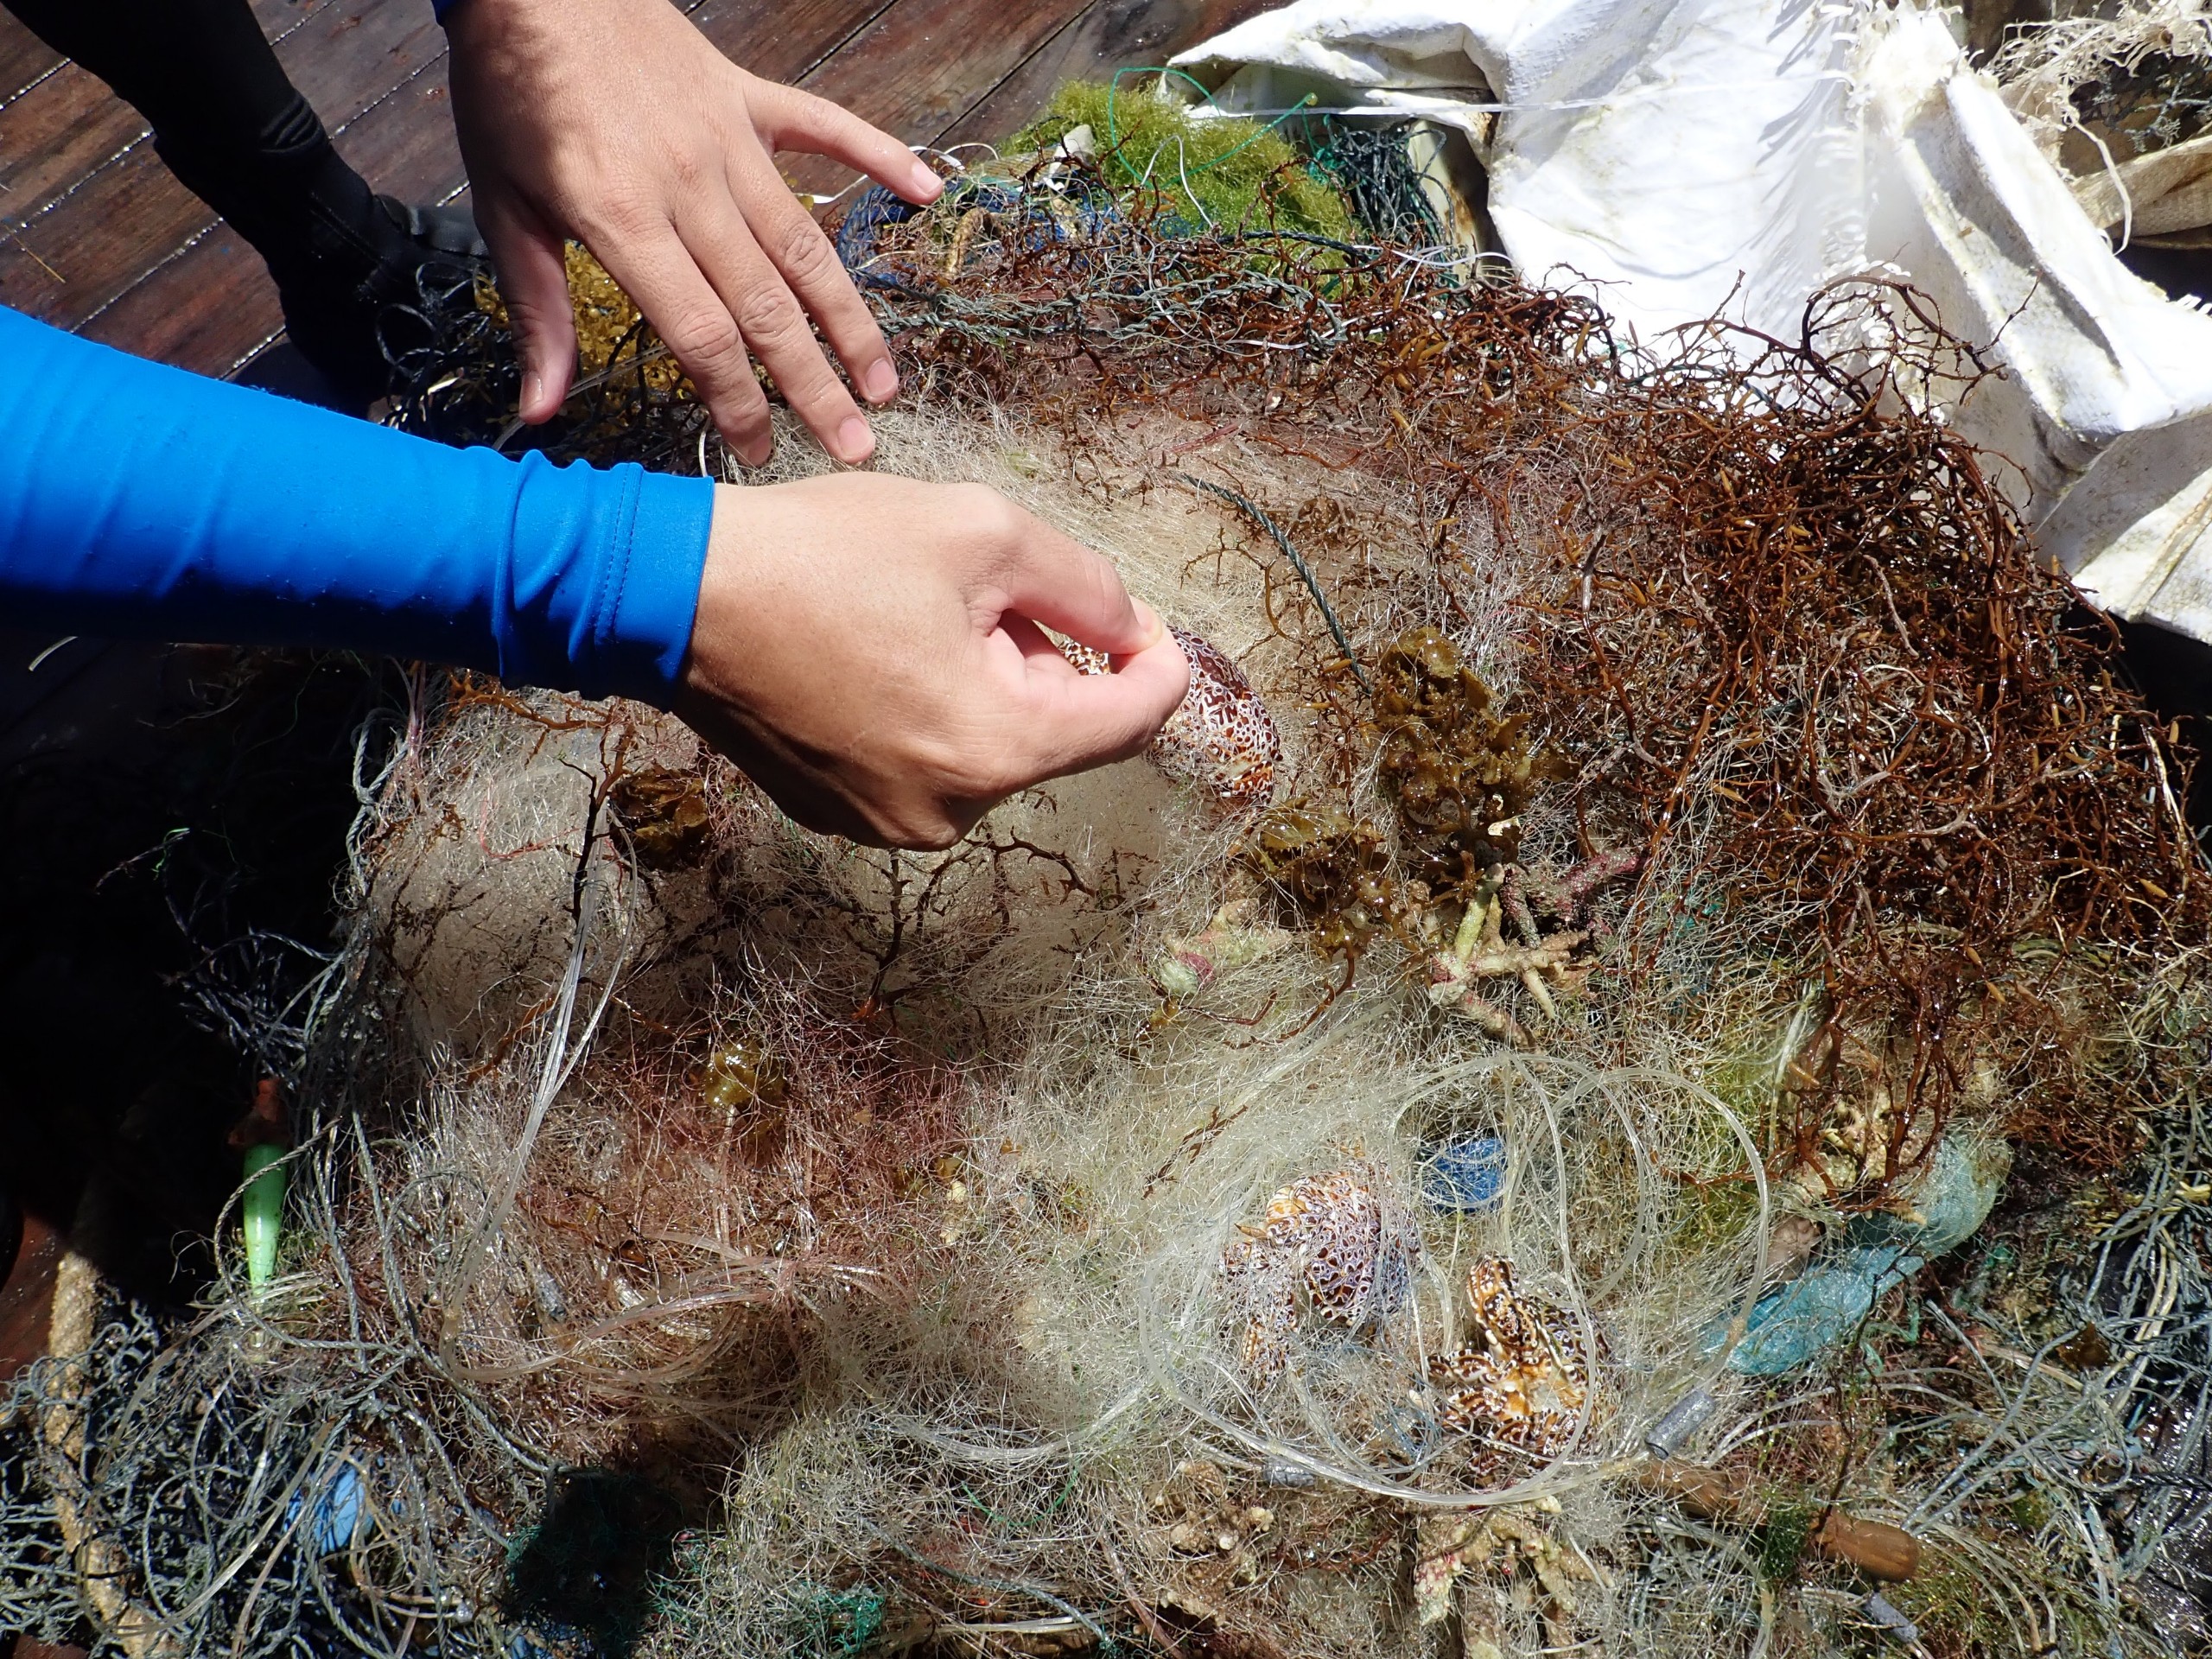 Coral is seen stuck in a fishing net taken ashore from the seabed at the Hon Mun Nature Reserve in Nha Trang City, Khanh Hoa Province, Vietnam. Photo: Van Duc /Handout via Tuoi Tre